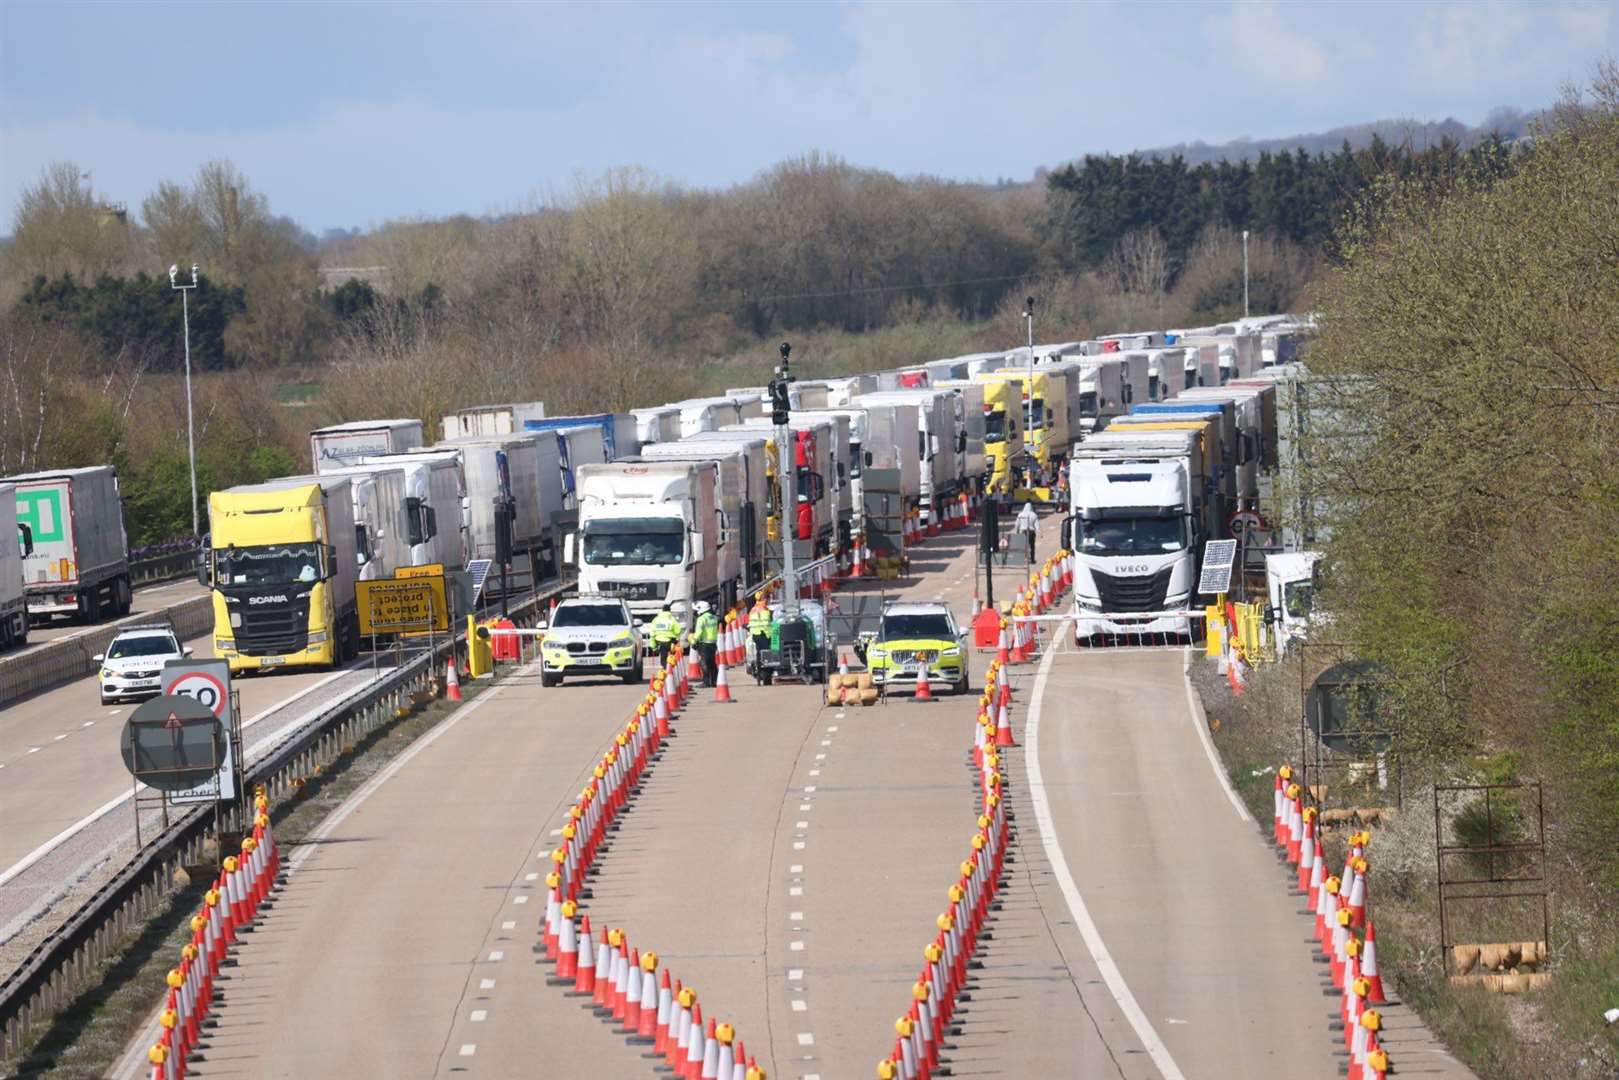 The hold-ups, and closure of the coastbound M20, could last for days. Picture: UKNIP